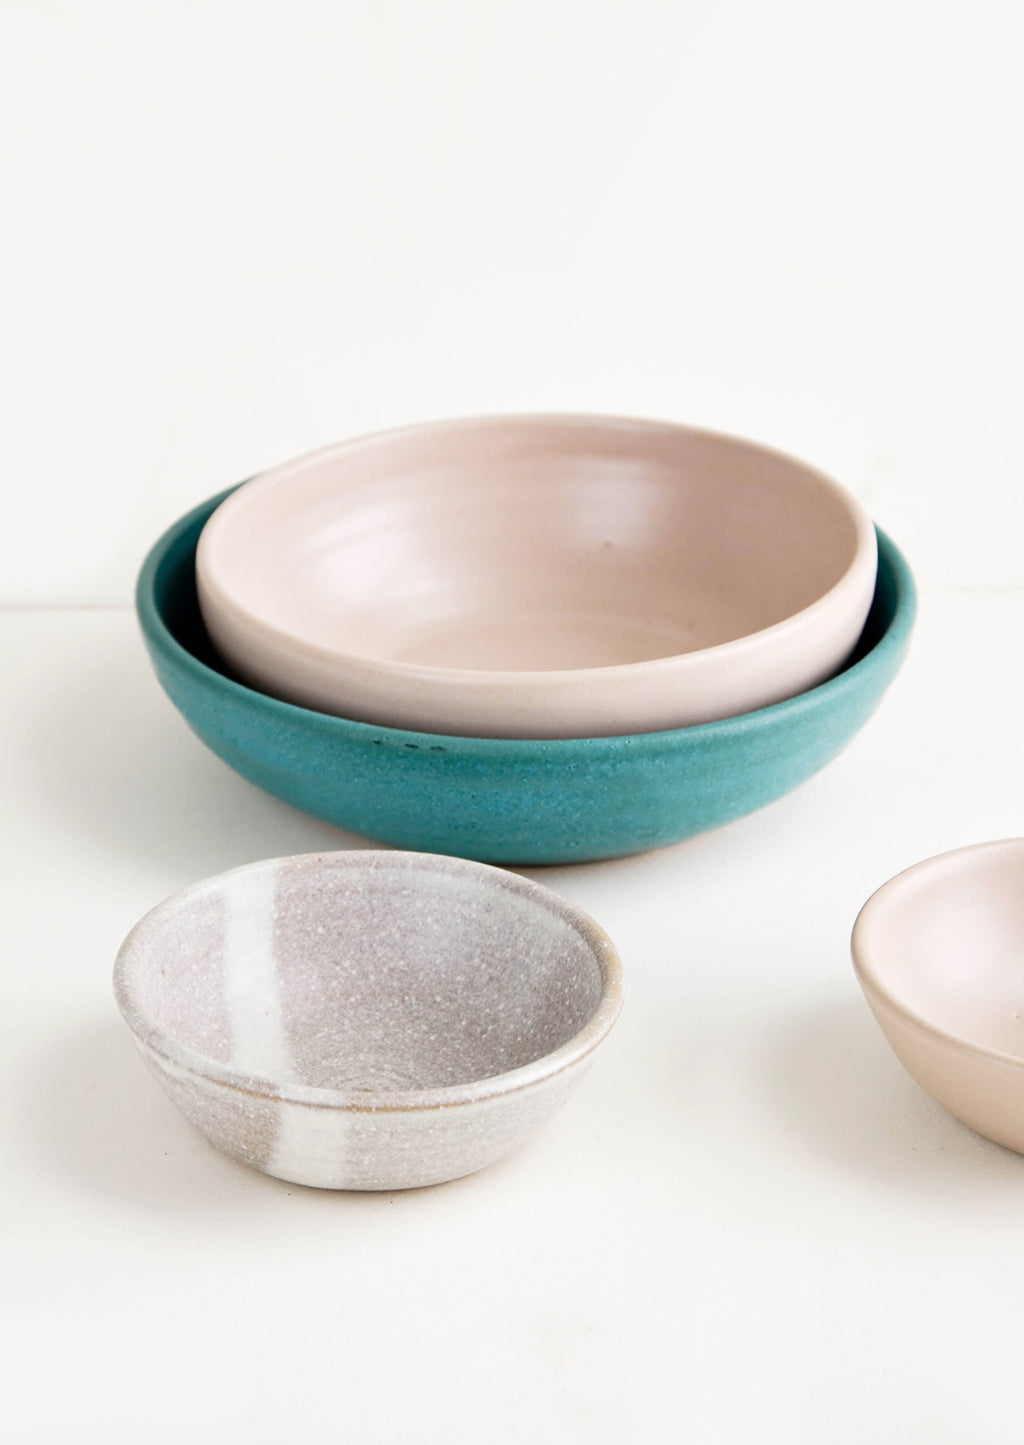 2: Grouping of handmade ceramic bowls in a mix of colors and sizes